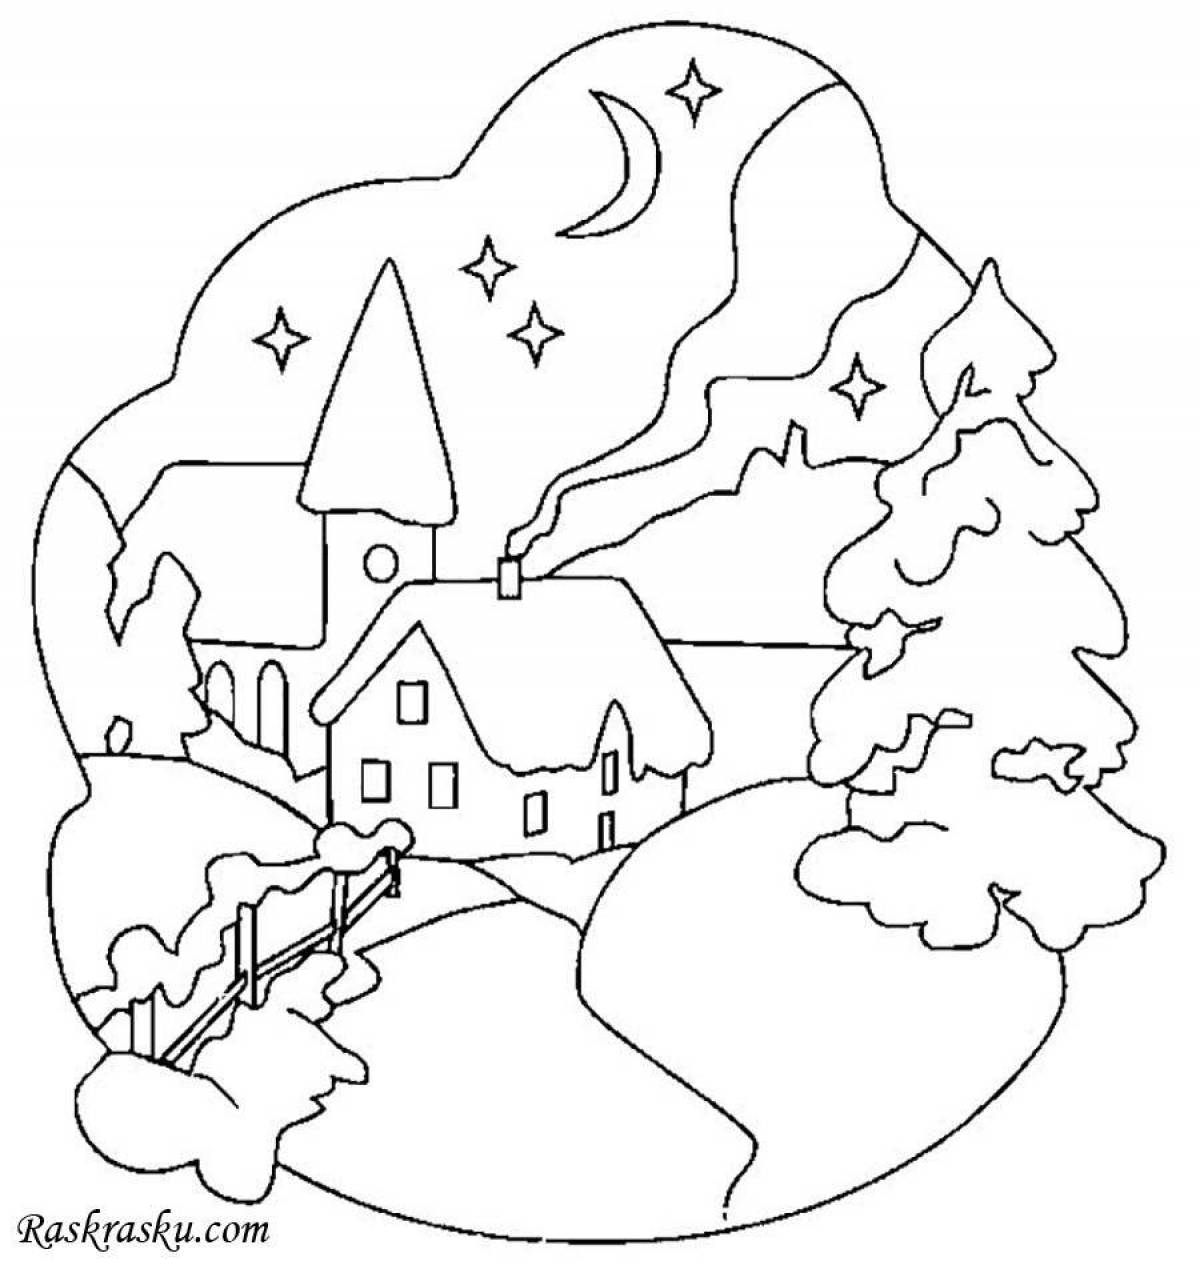 Blissful winter landscape coloring pages for children